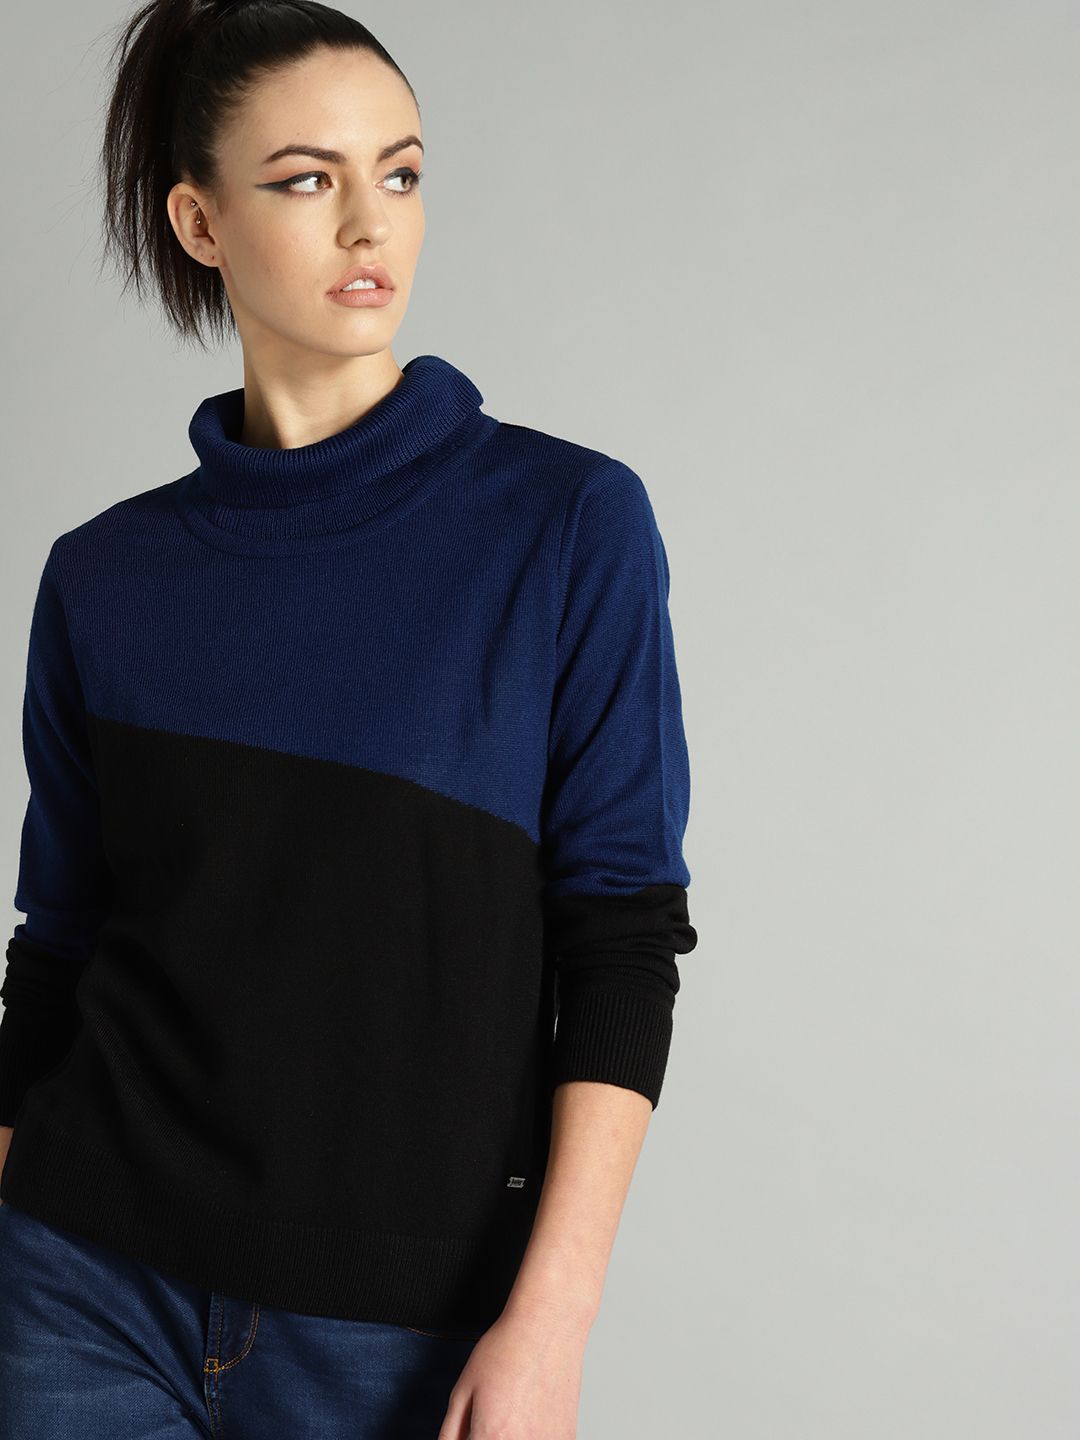 The Roadster Lifestyle Co Women Navy Blue & Black Colourblocked Sweater Price in India